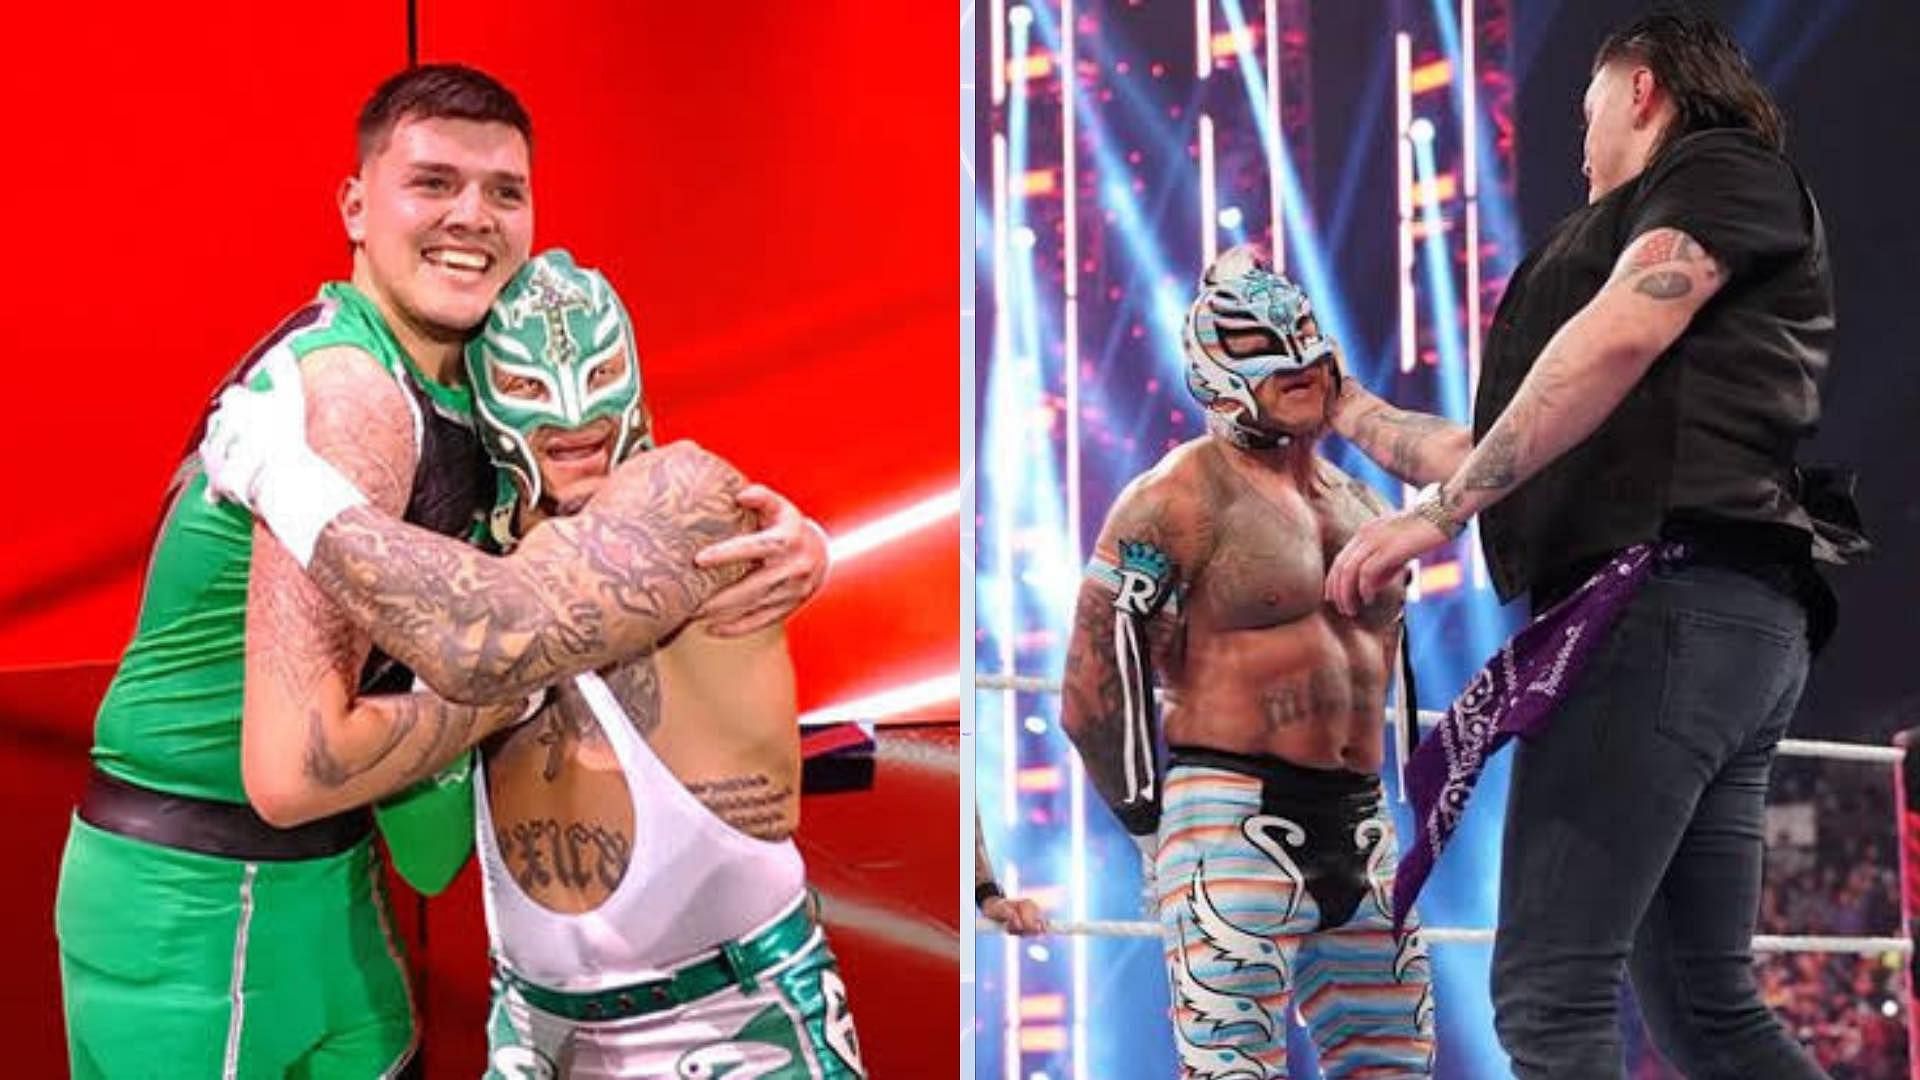 Dominik and Rey Mysterio could have a match in WWE